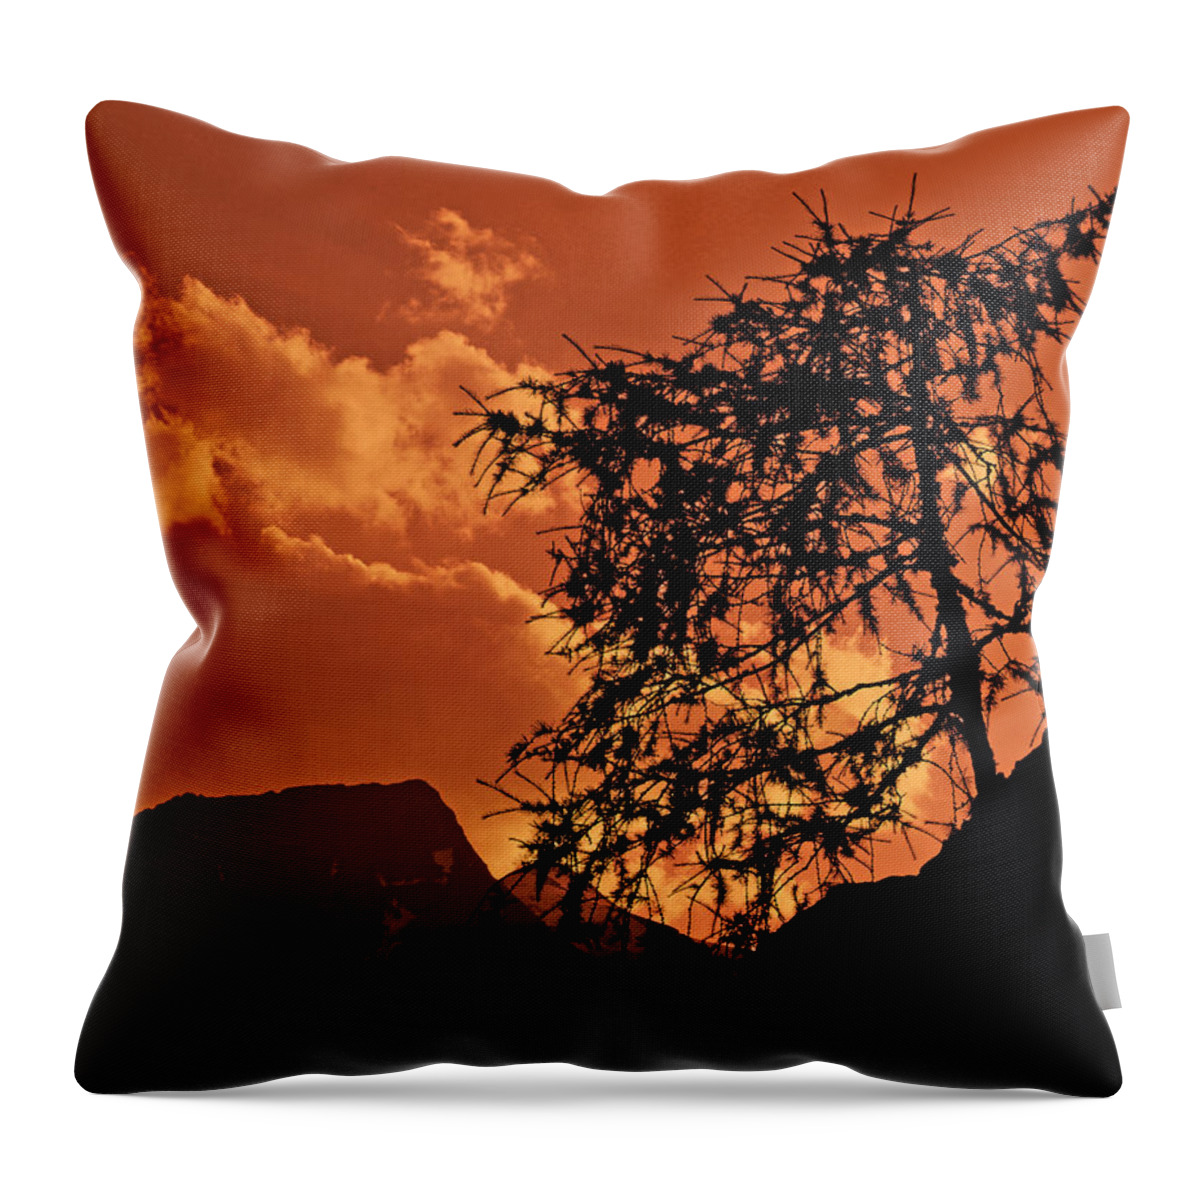 Landscape Throw Pillow featuring the photograph A Tranquil Moment by Gerlinde Keating - Galleria GK Keating Associates Inc